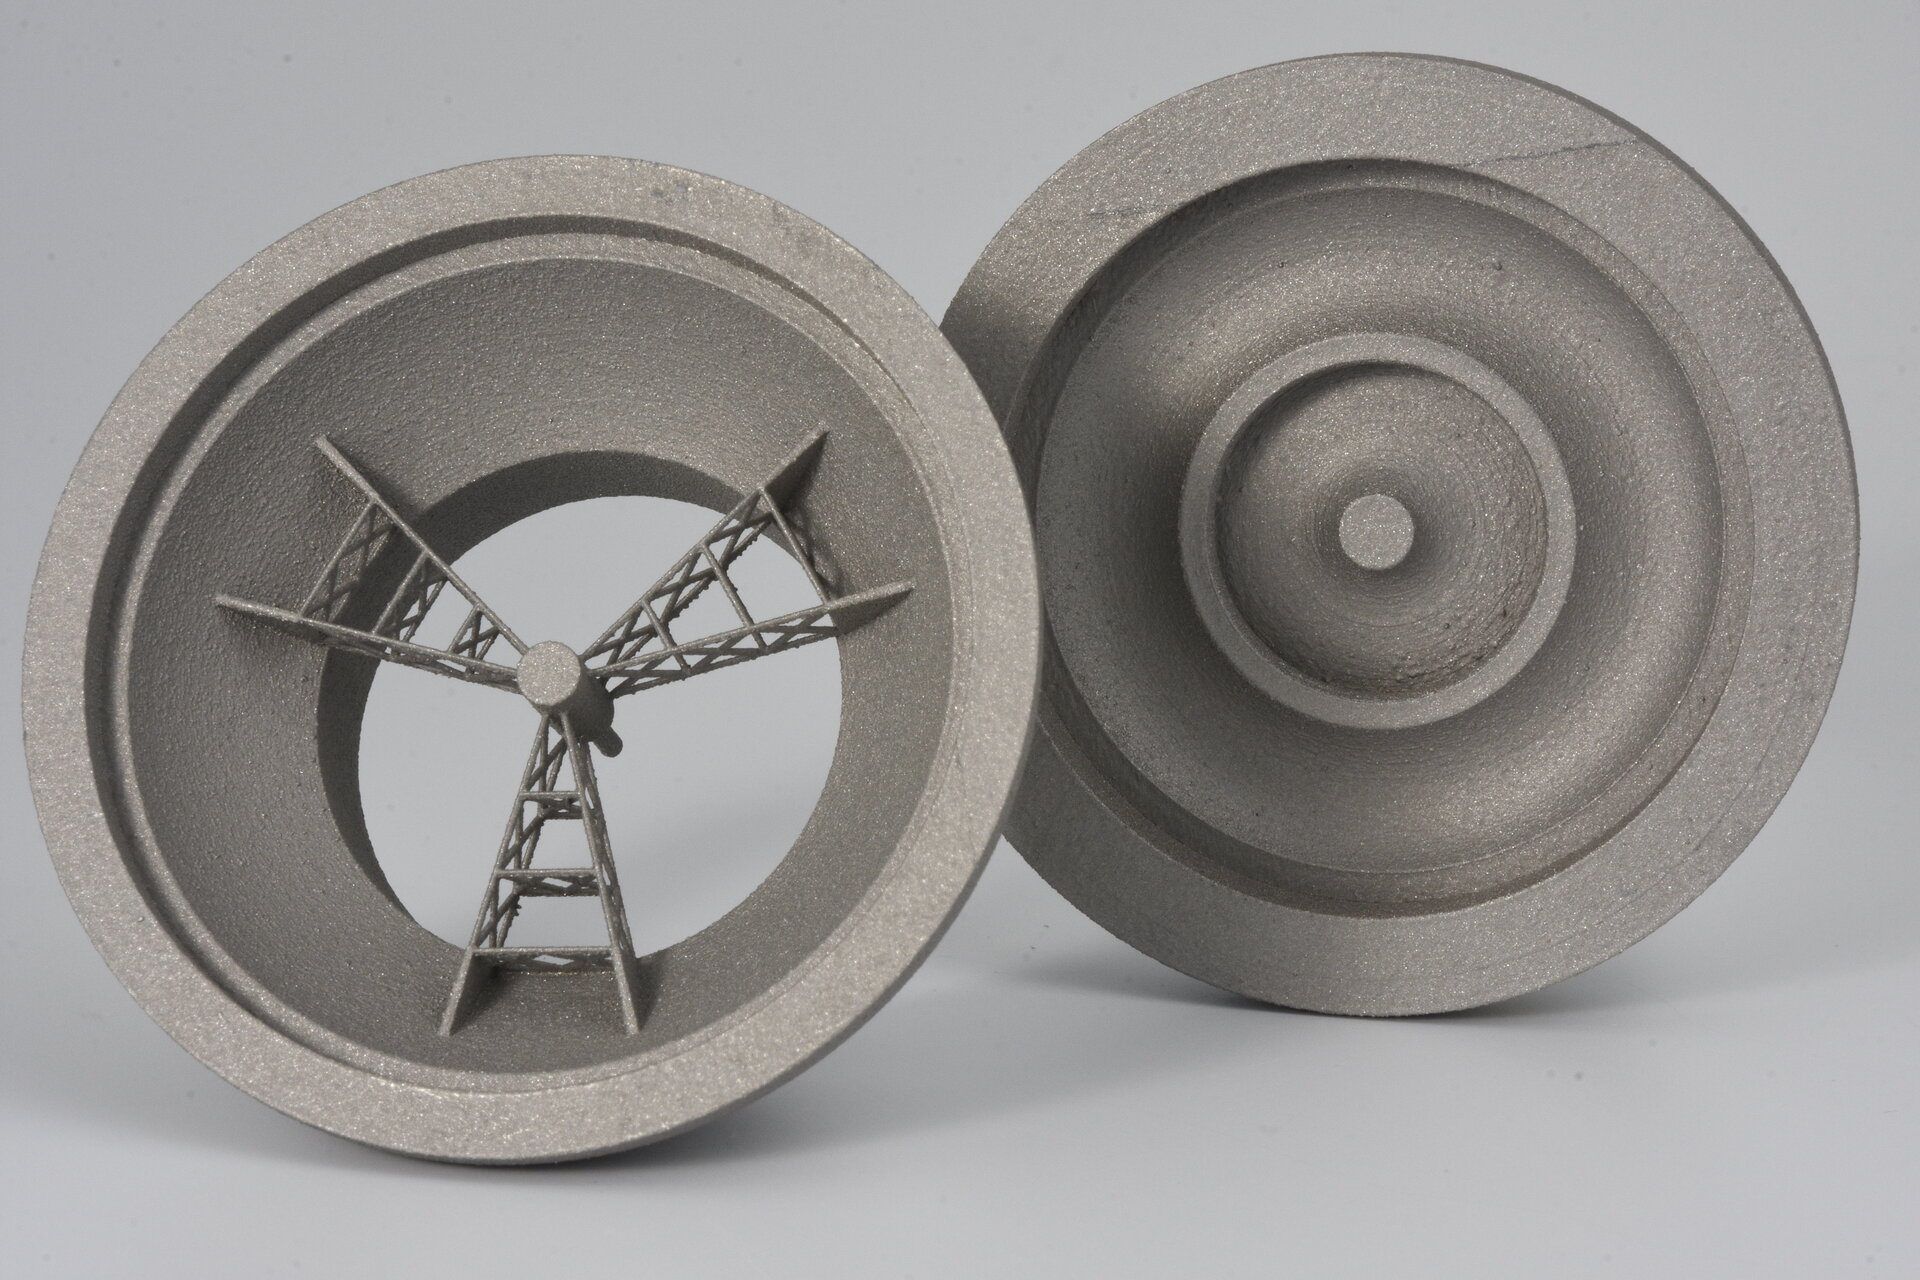 Additive Manufacturing of Soft Magnetic Material